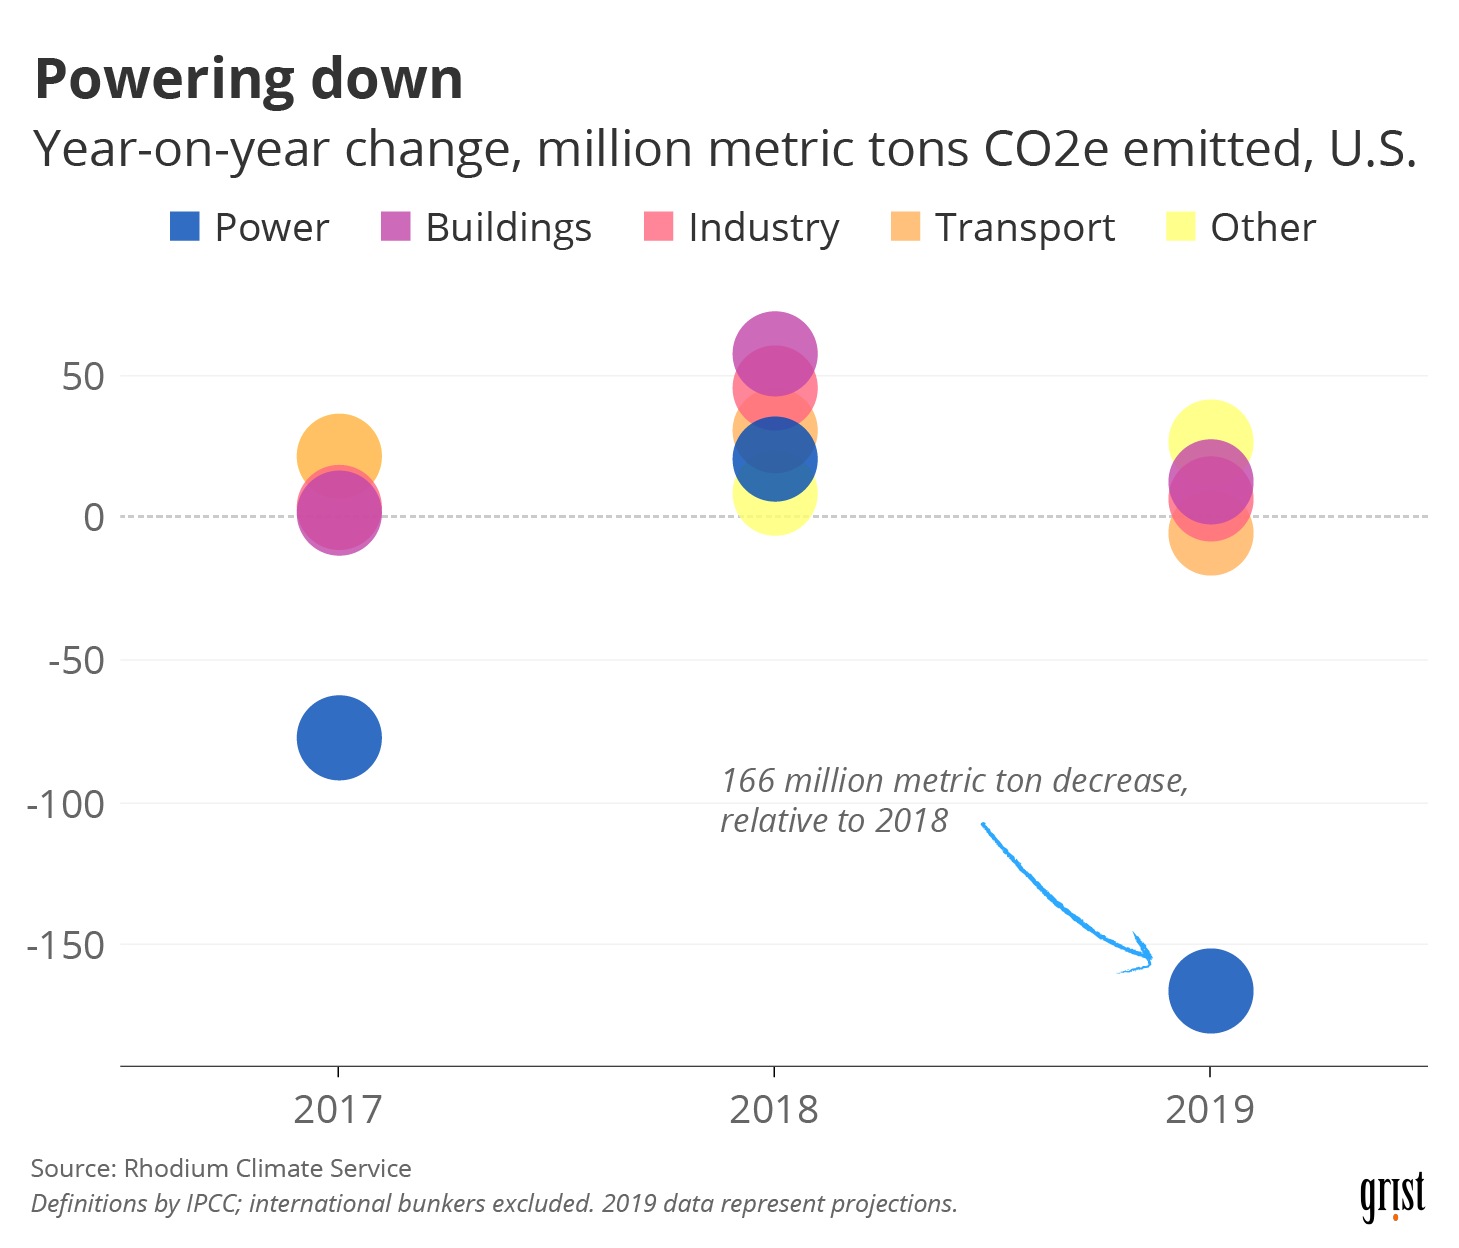 A chart showing year-on-year changes in U.S. GHG emissions by sector for 2017–19. In 2019, the power sector saw its emissions decrease by 166 million metric tons, relative to 2018.